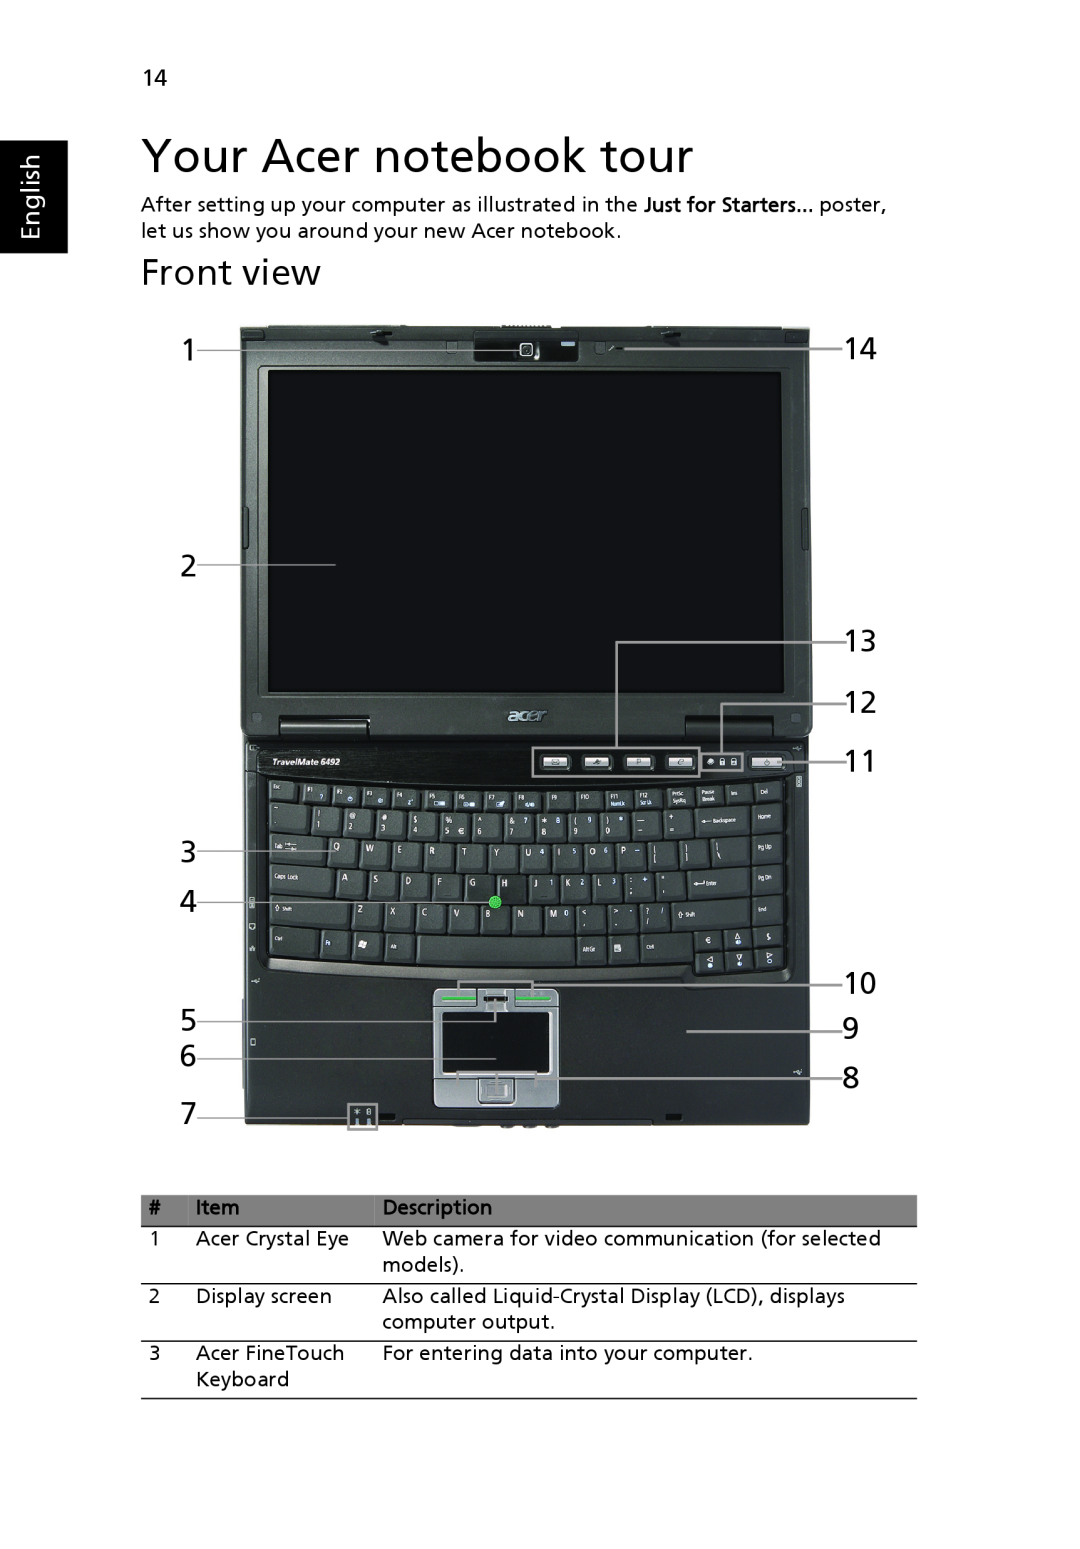 Acer 6492G, 6492 Series manual Your Acer notebook tour, Front view, English, Description 